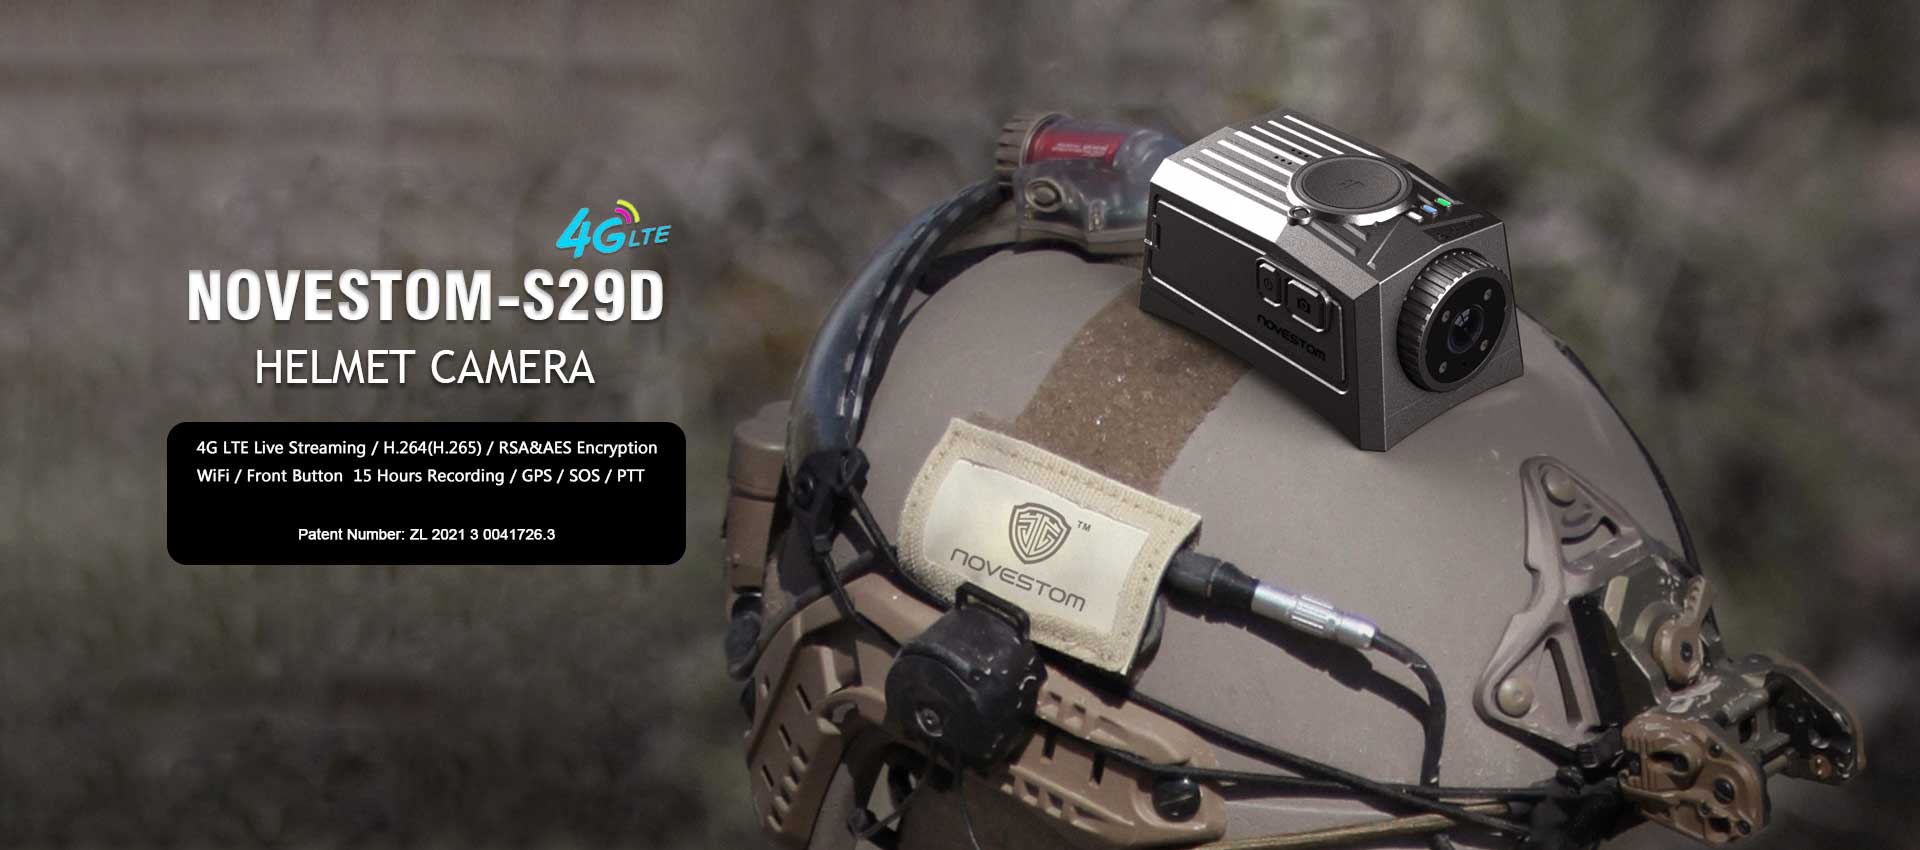 NOVESTOM S29D-4G-live-streaming-Military-Tactical-helmet-camera with GPS WIFI LTE live streaming